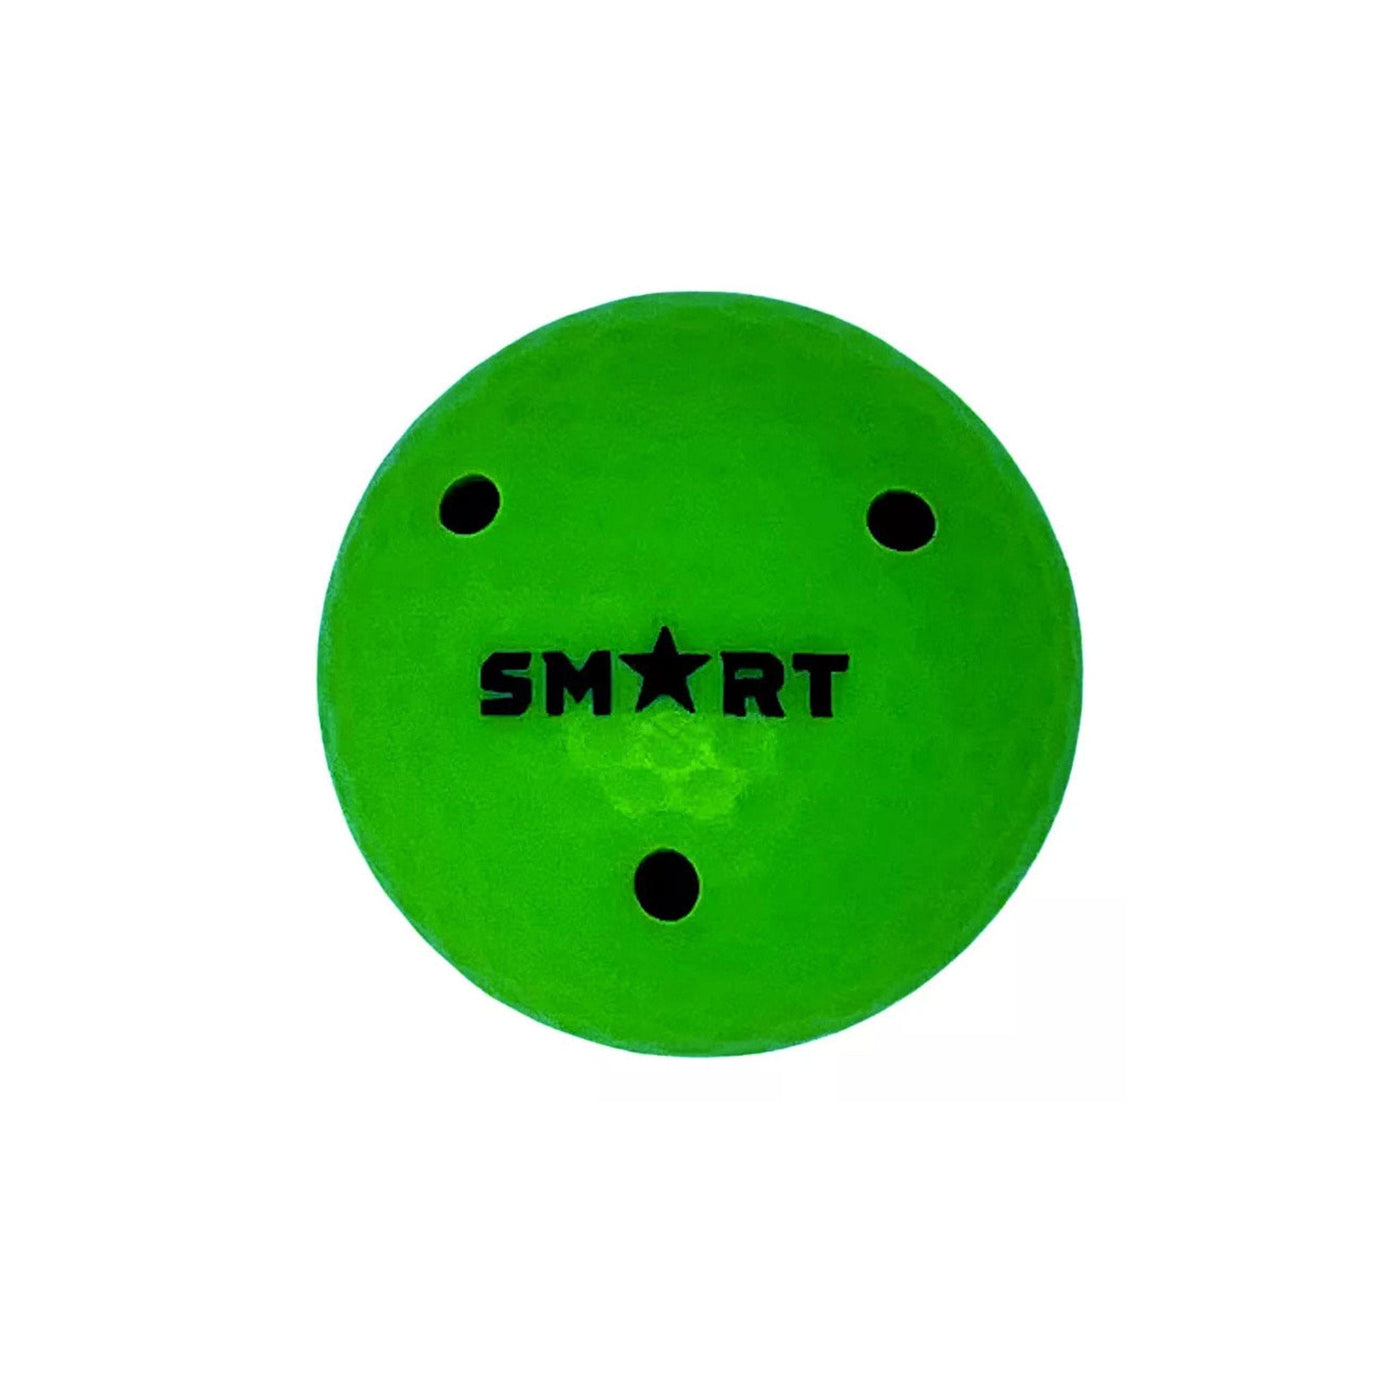 Bright green ball weighing 3 ounces used for improving stickhandling and puck control skills. Stickhandling, training, puck handling, medicine ball, hard ball, training ball, weighted ball, skills.